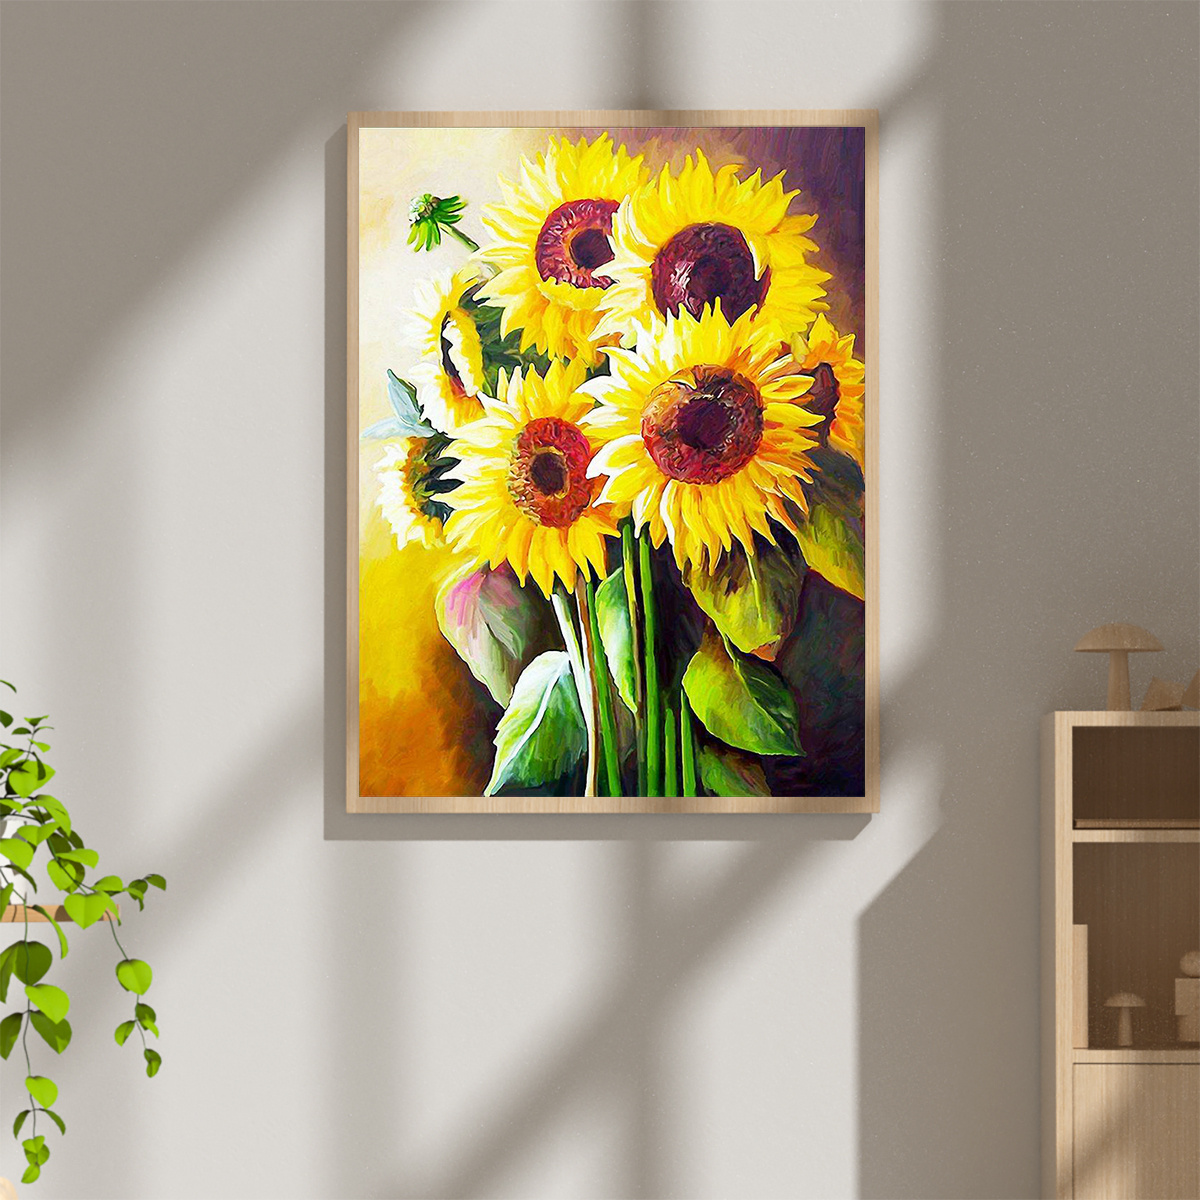  Flower Diamond Painting Kits For Adults, Full Drill